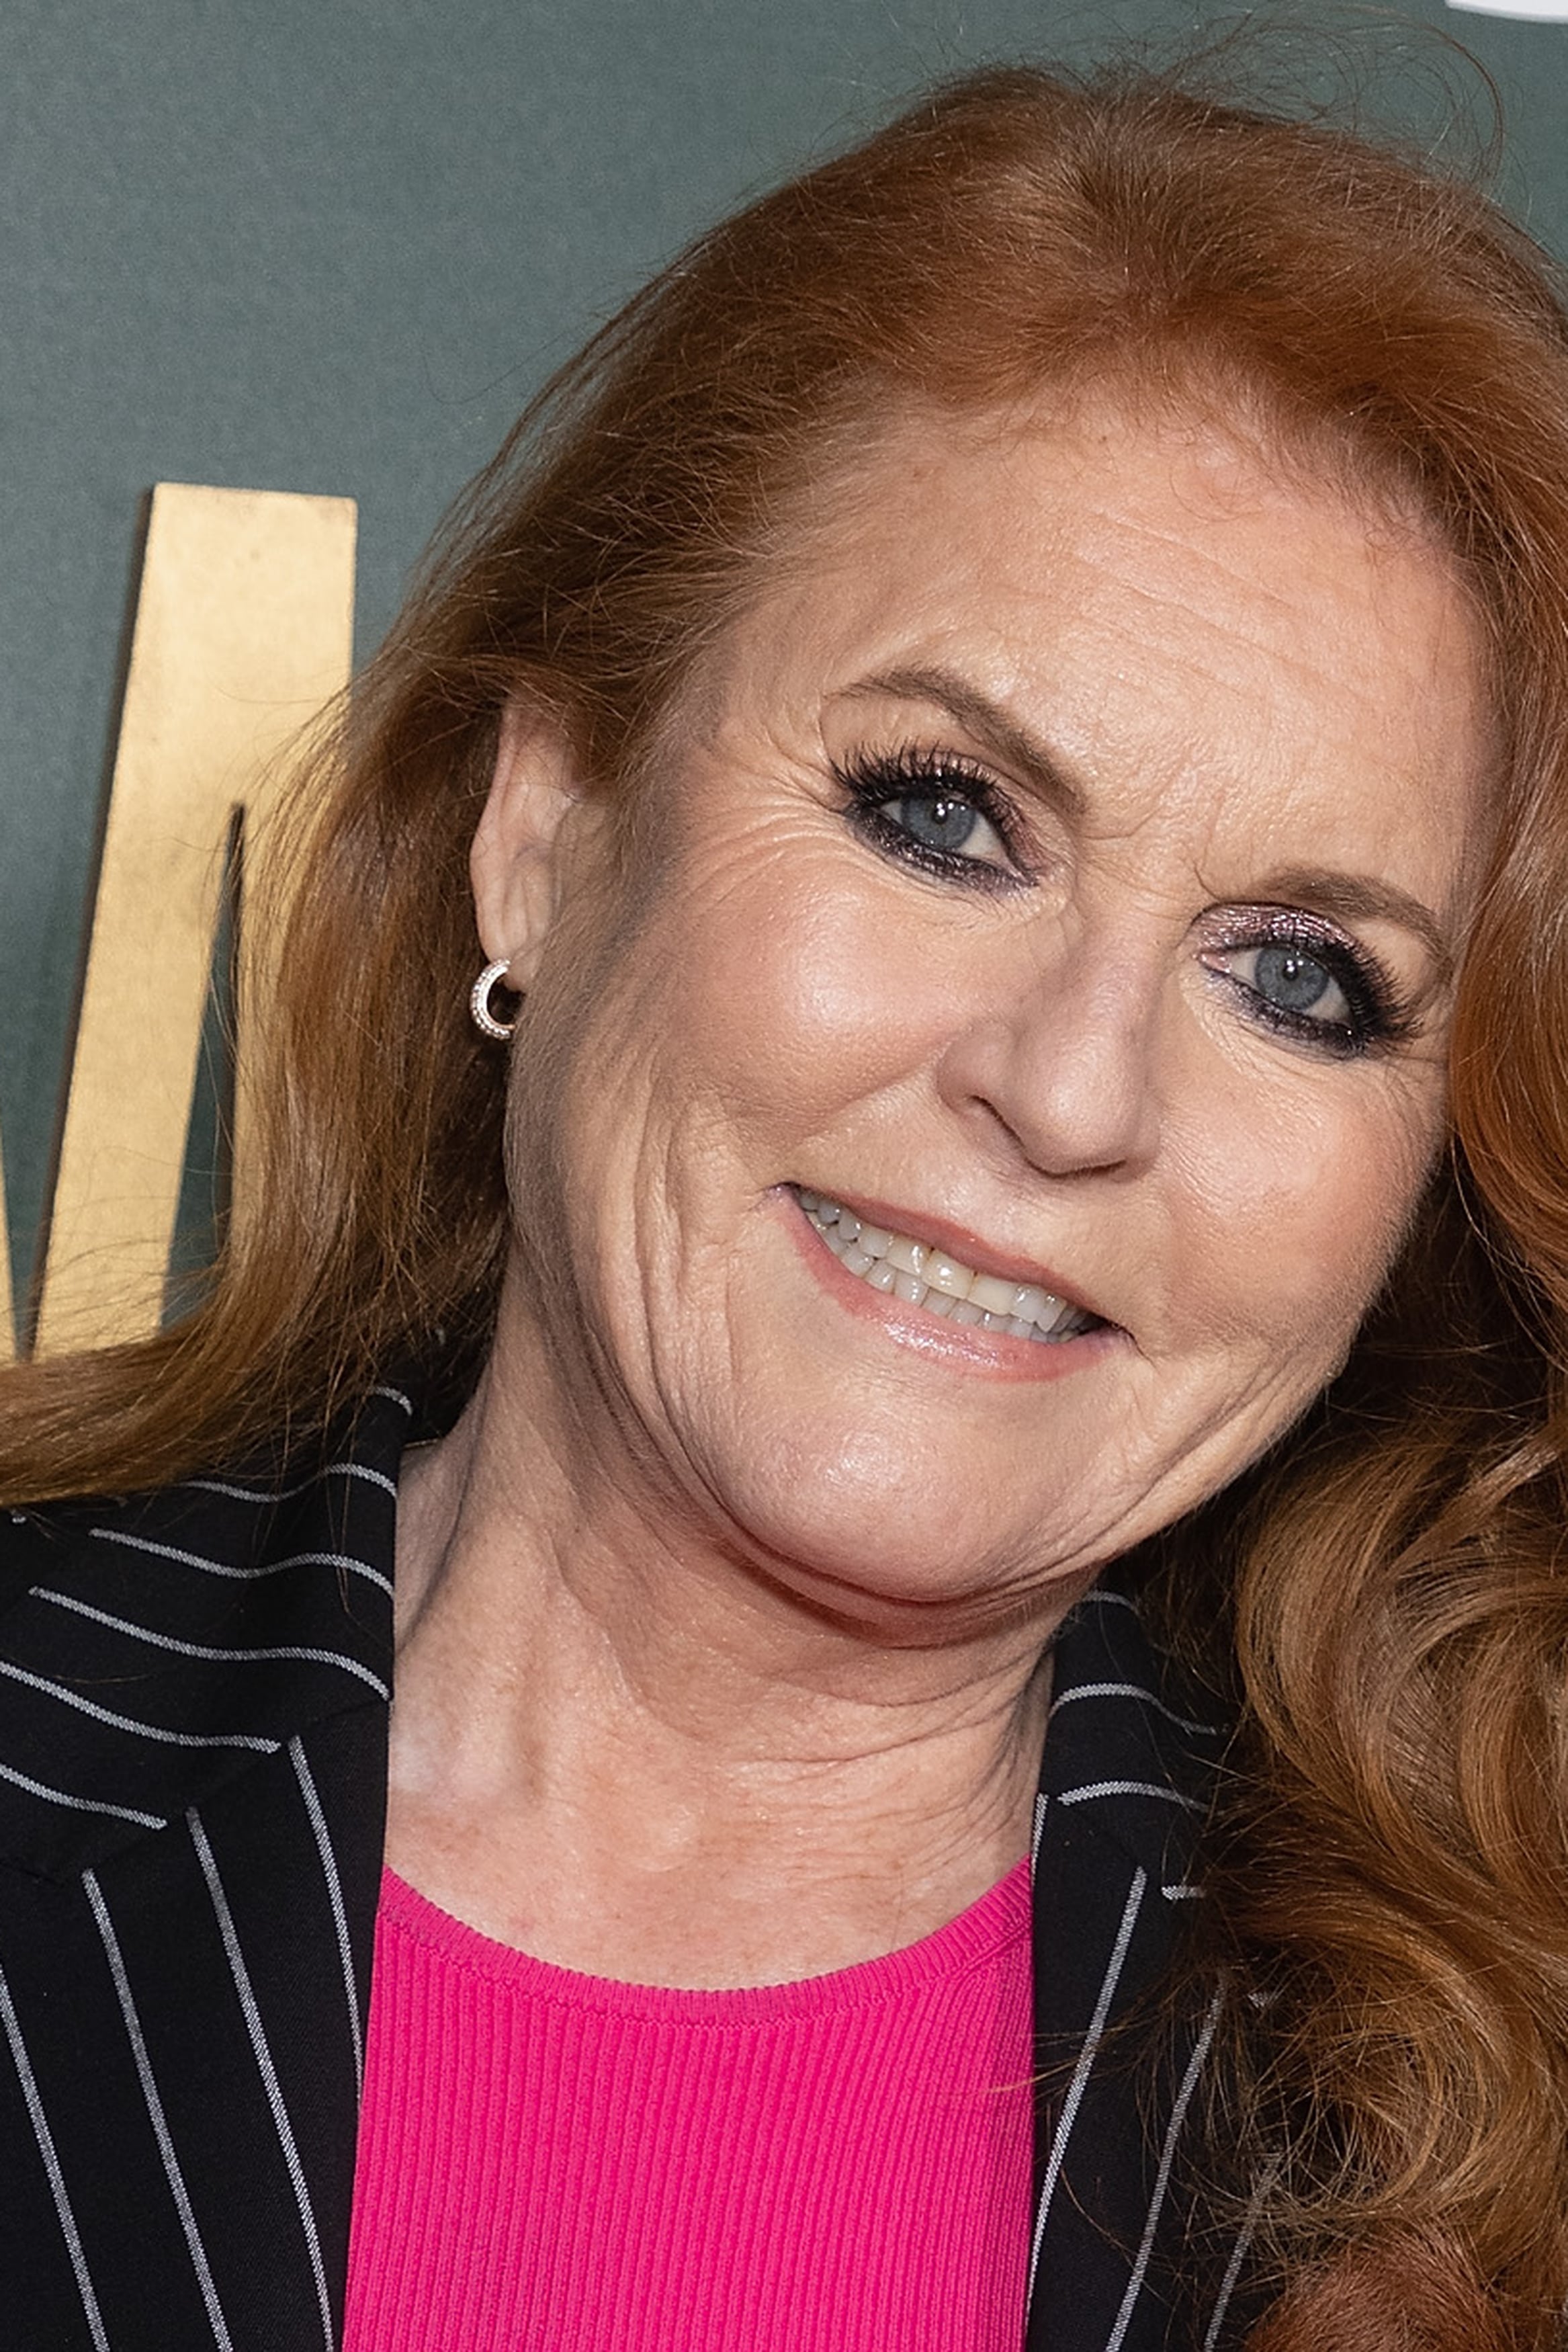 Sarah Ferguson Shares She Underwent Surgery After Receiving a Breast Cancer Diagnosis